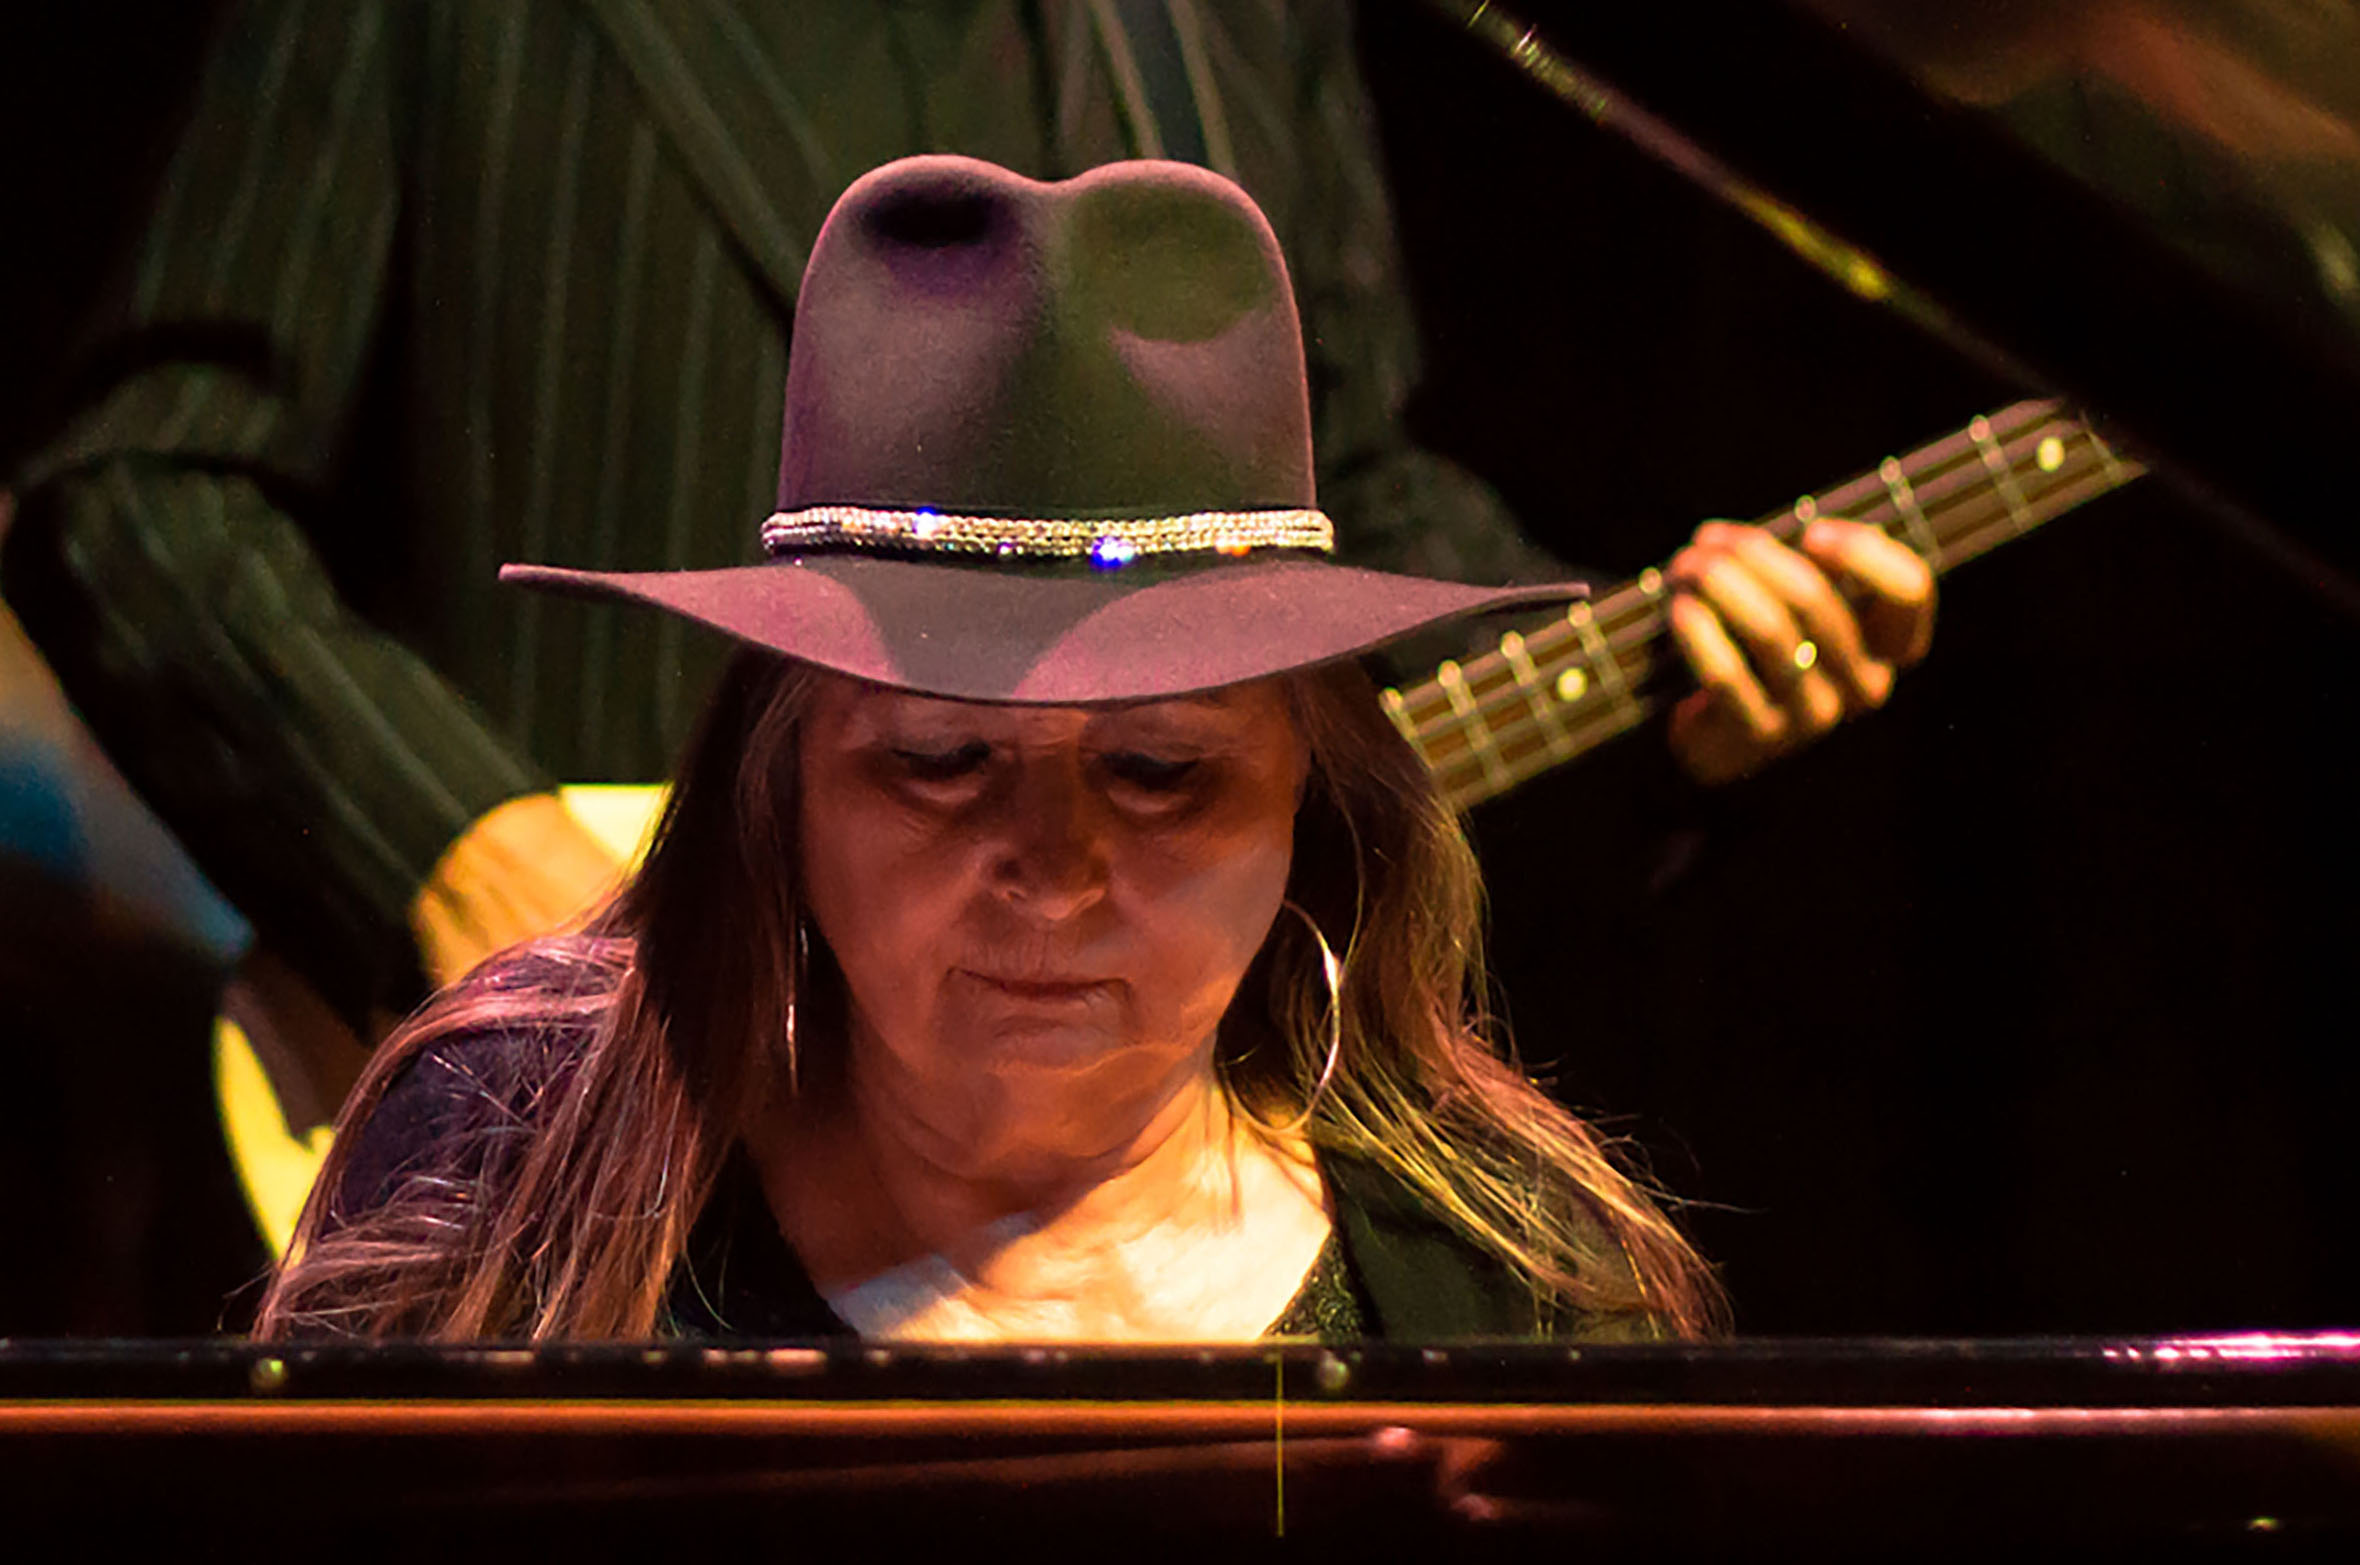 Bobbie Nelson, wearing a sequined black hat, plays the piano in front of a band